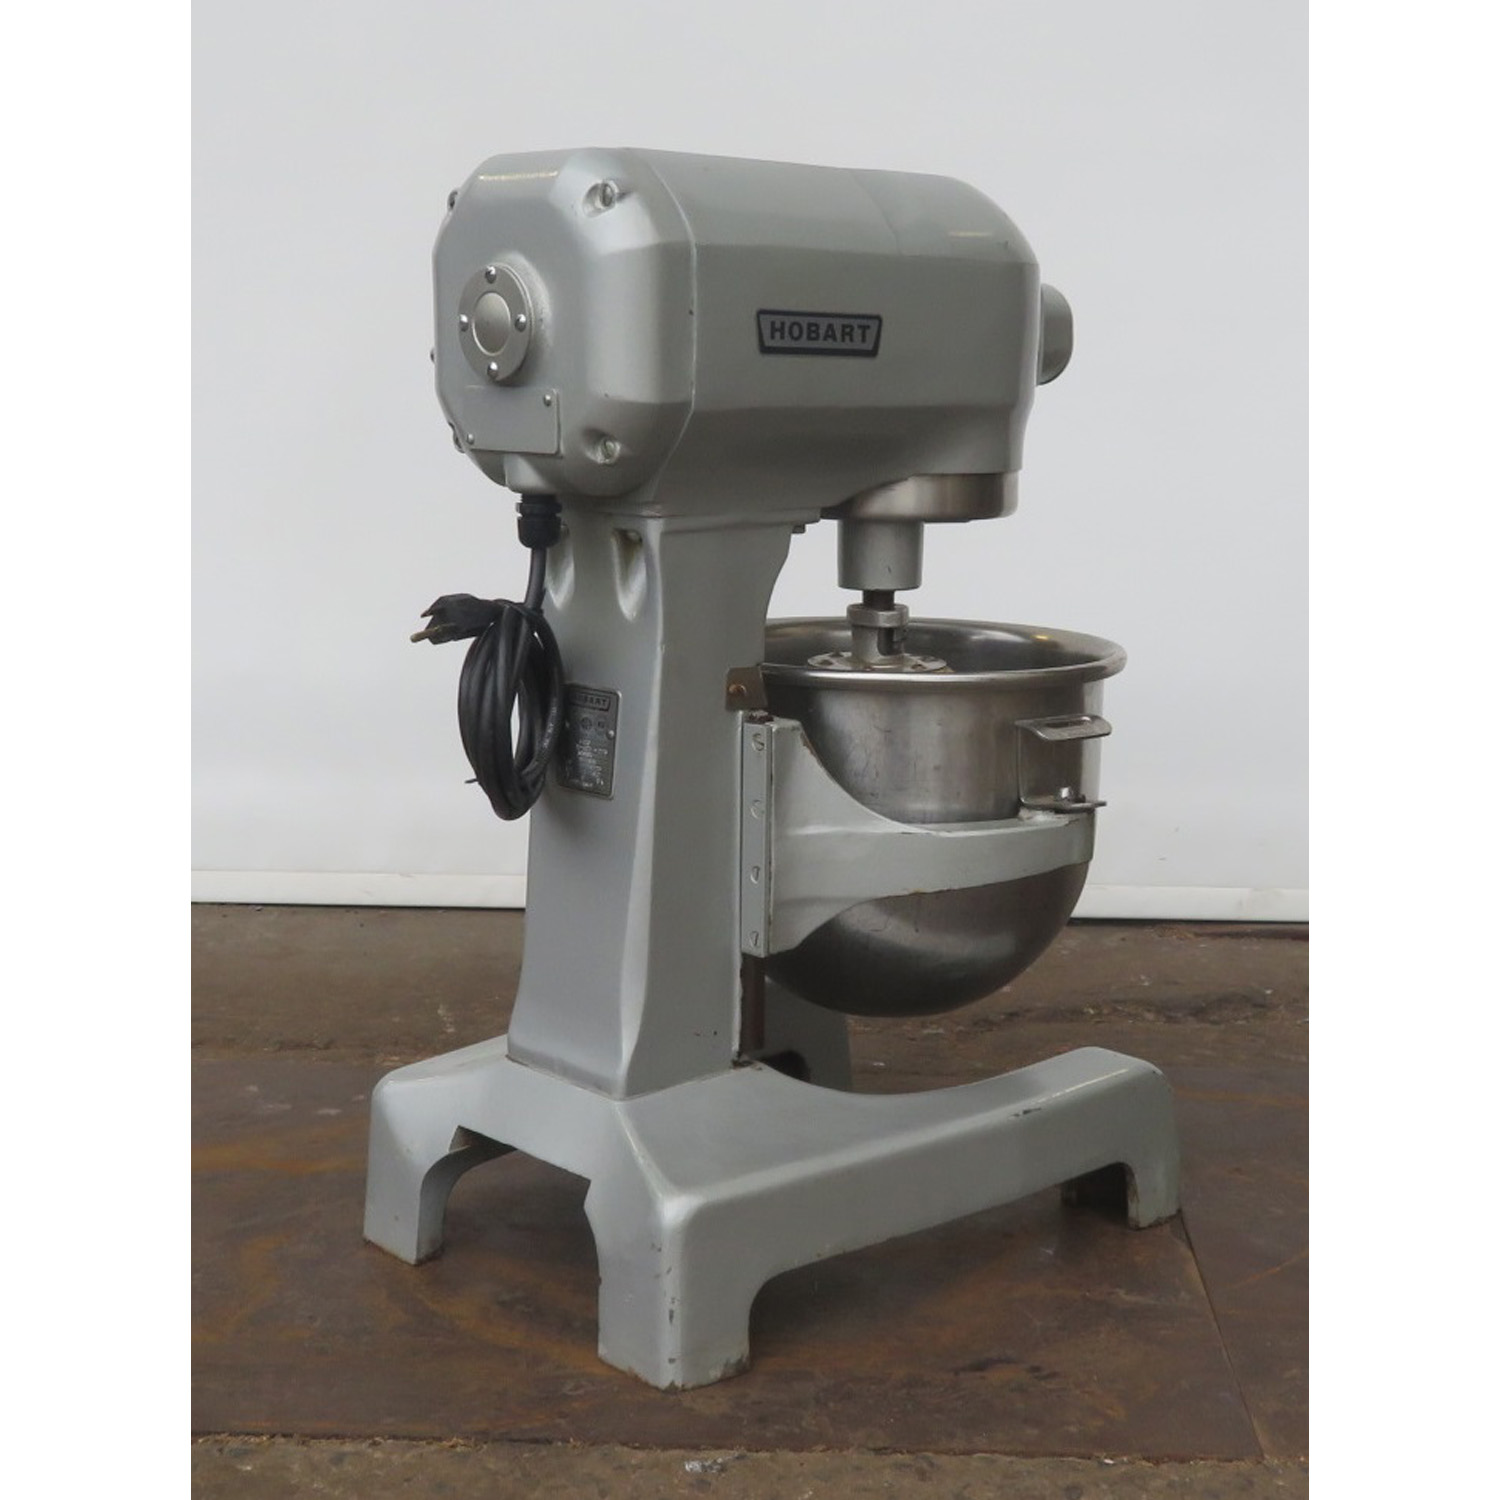 Hobart 12 Quart A120 Mixer, Used Excellent Condition image 1